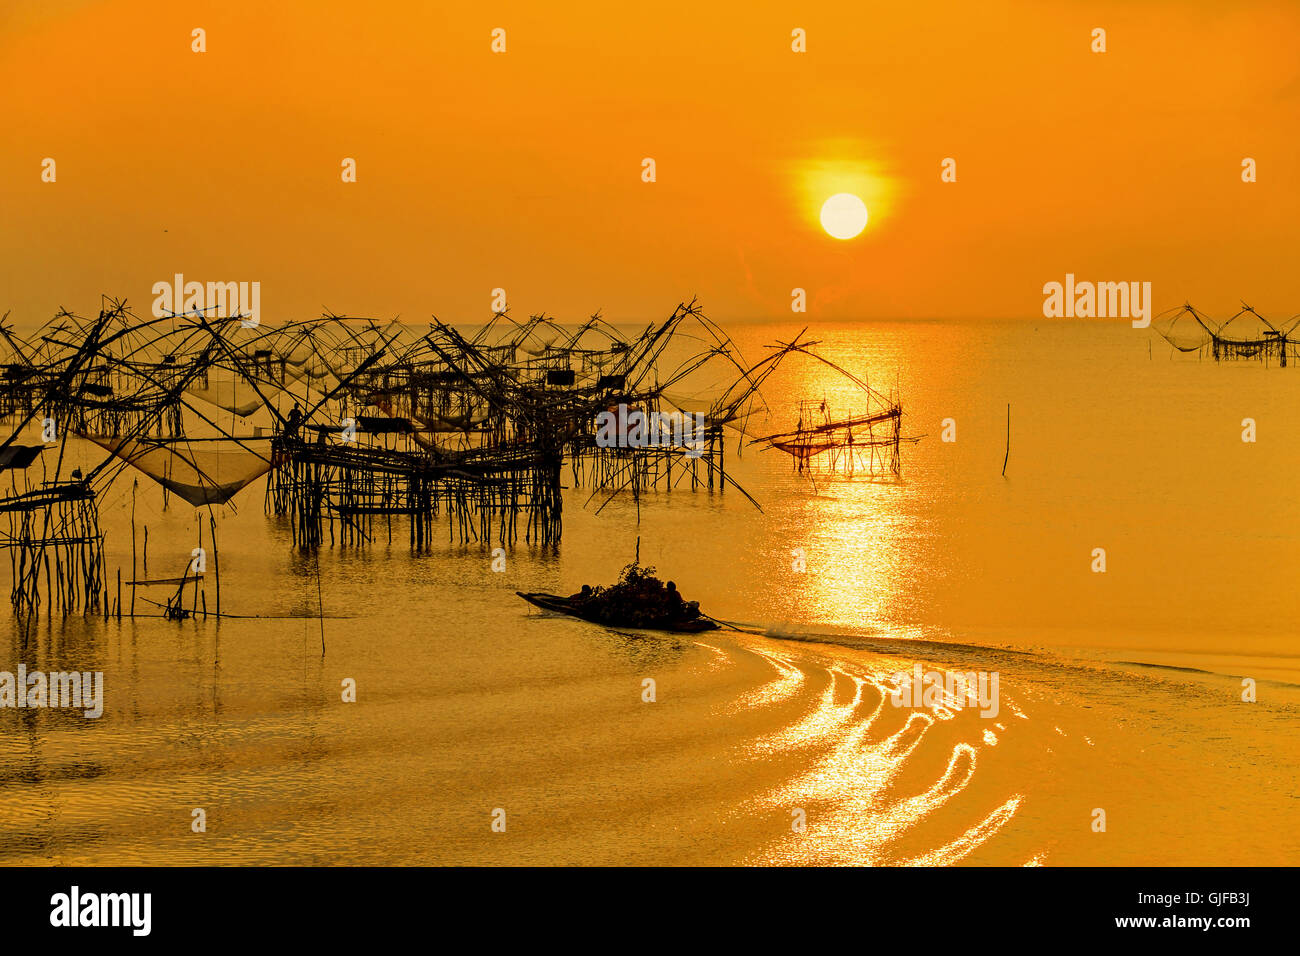 Morning sunrise withThai folk fishery style at Pakpra, Pattalung, Southern, Thailand. Stock Photo